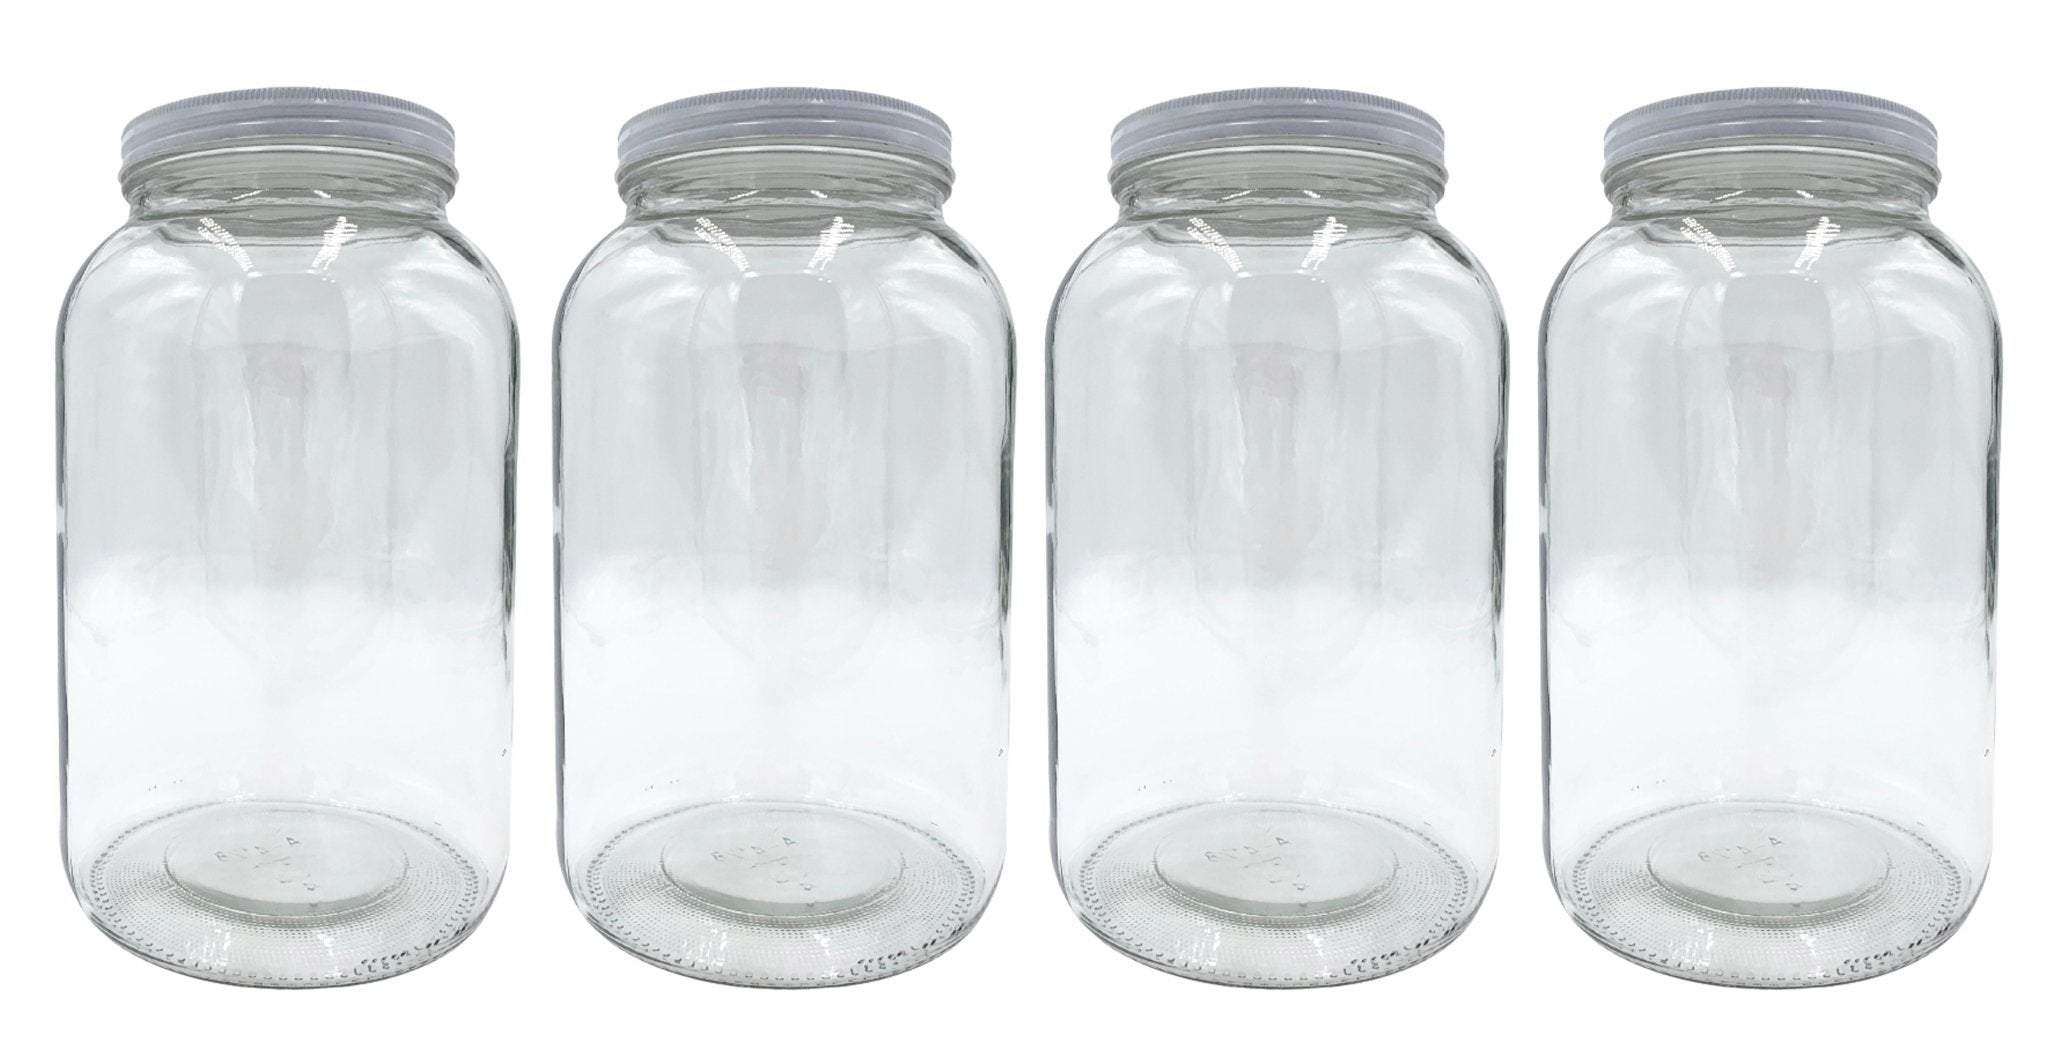 10 oz. Apothecary Jar - with Choice of Lid - priced per case of 12 jars